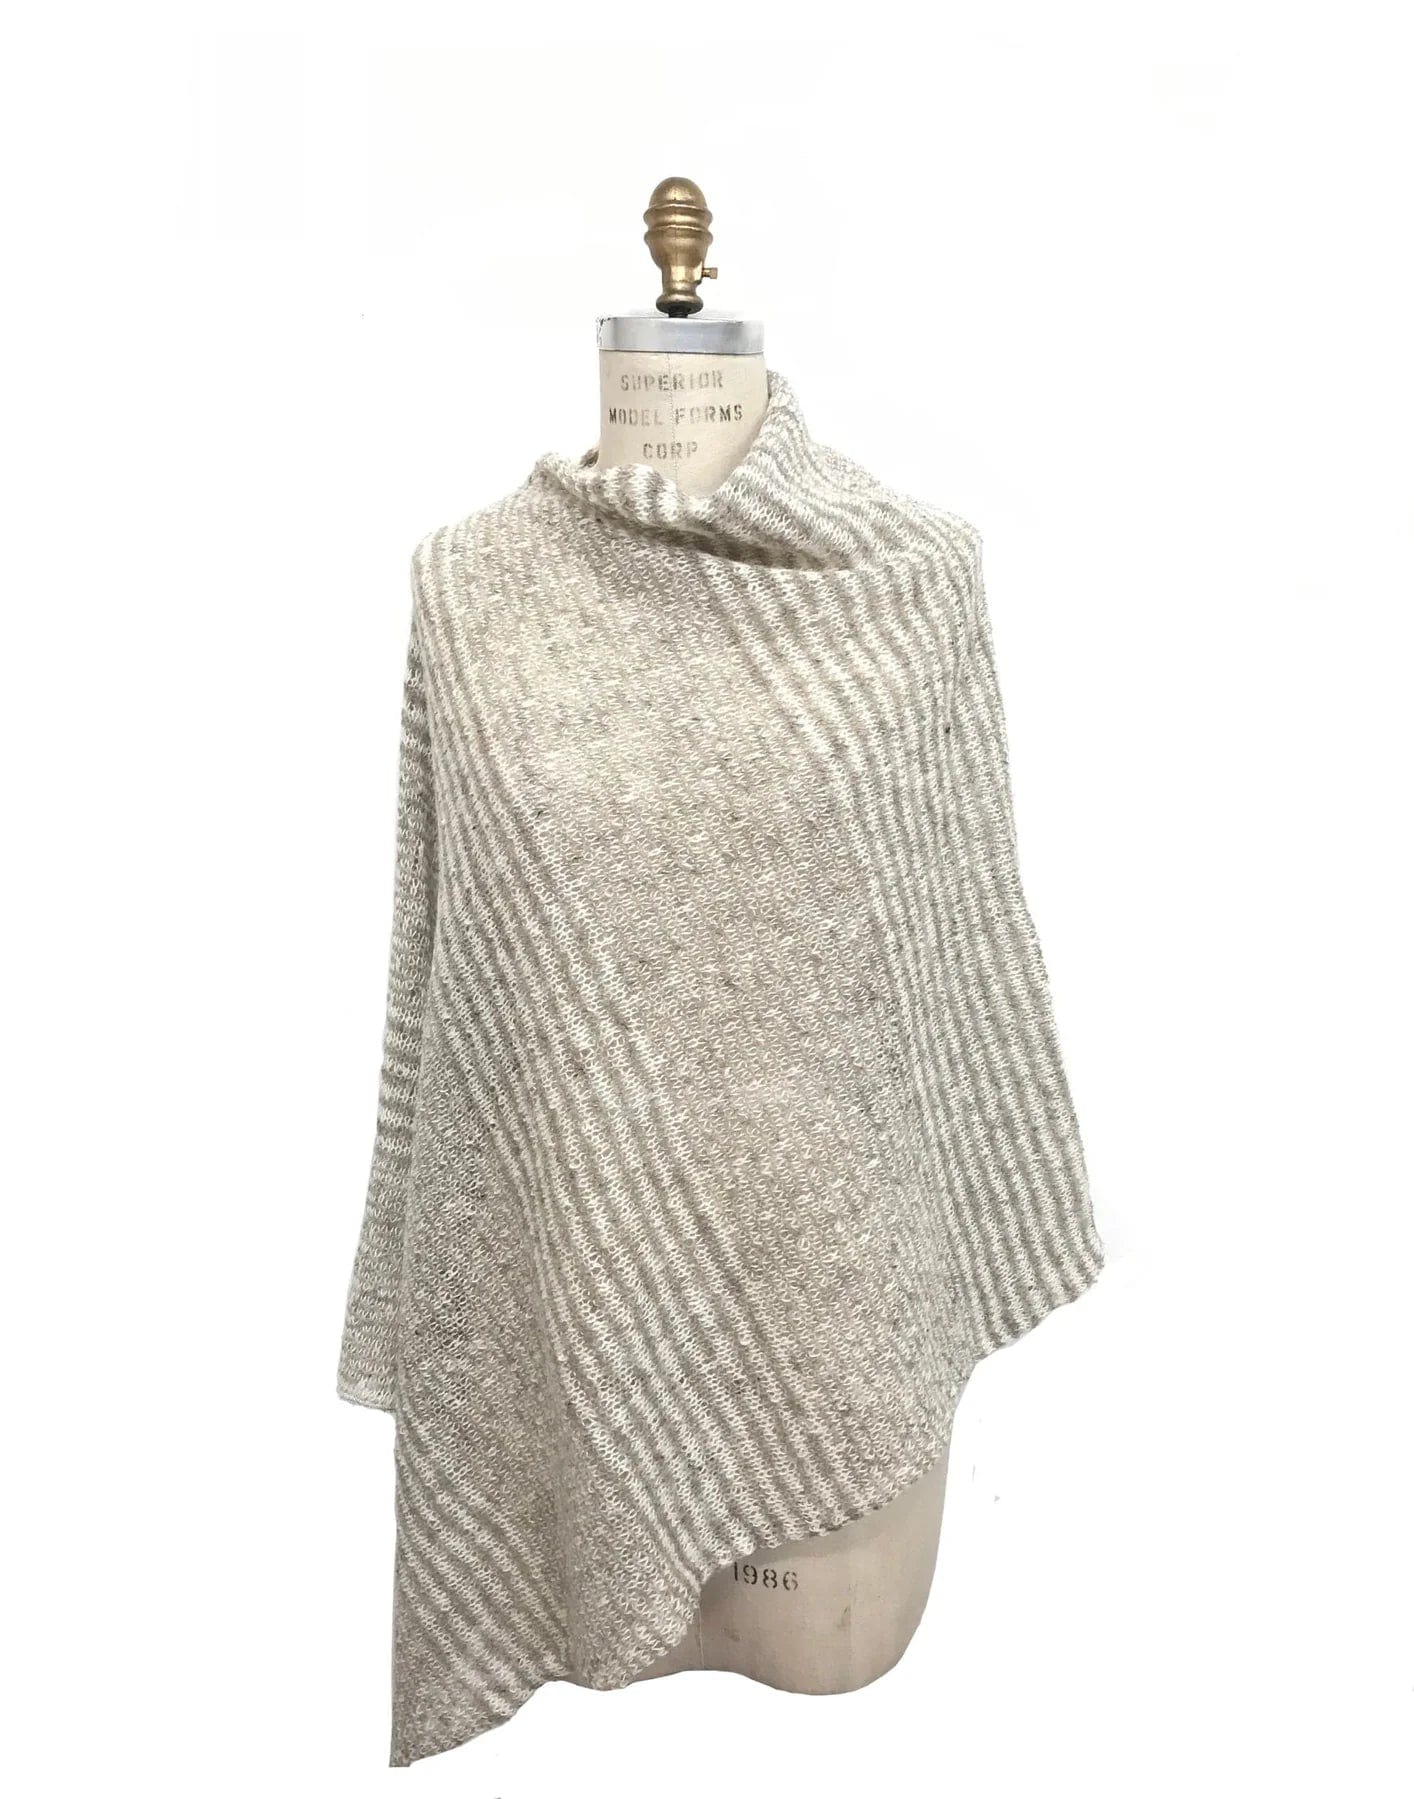 Light Wool Poncho - Grey and Black - The Icelandic Store